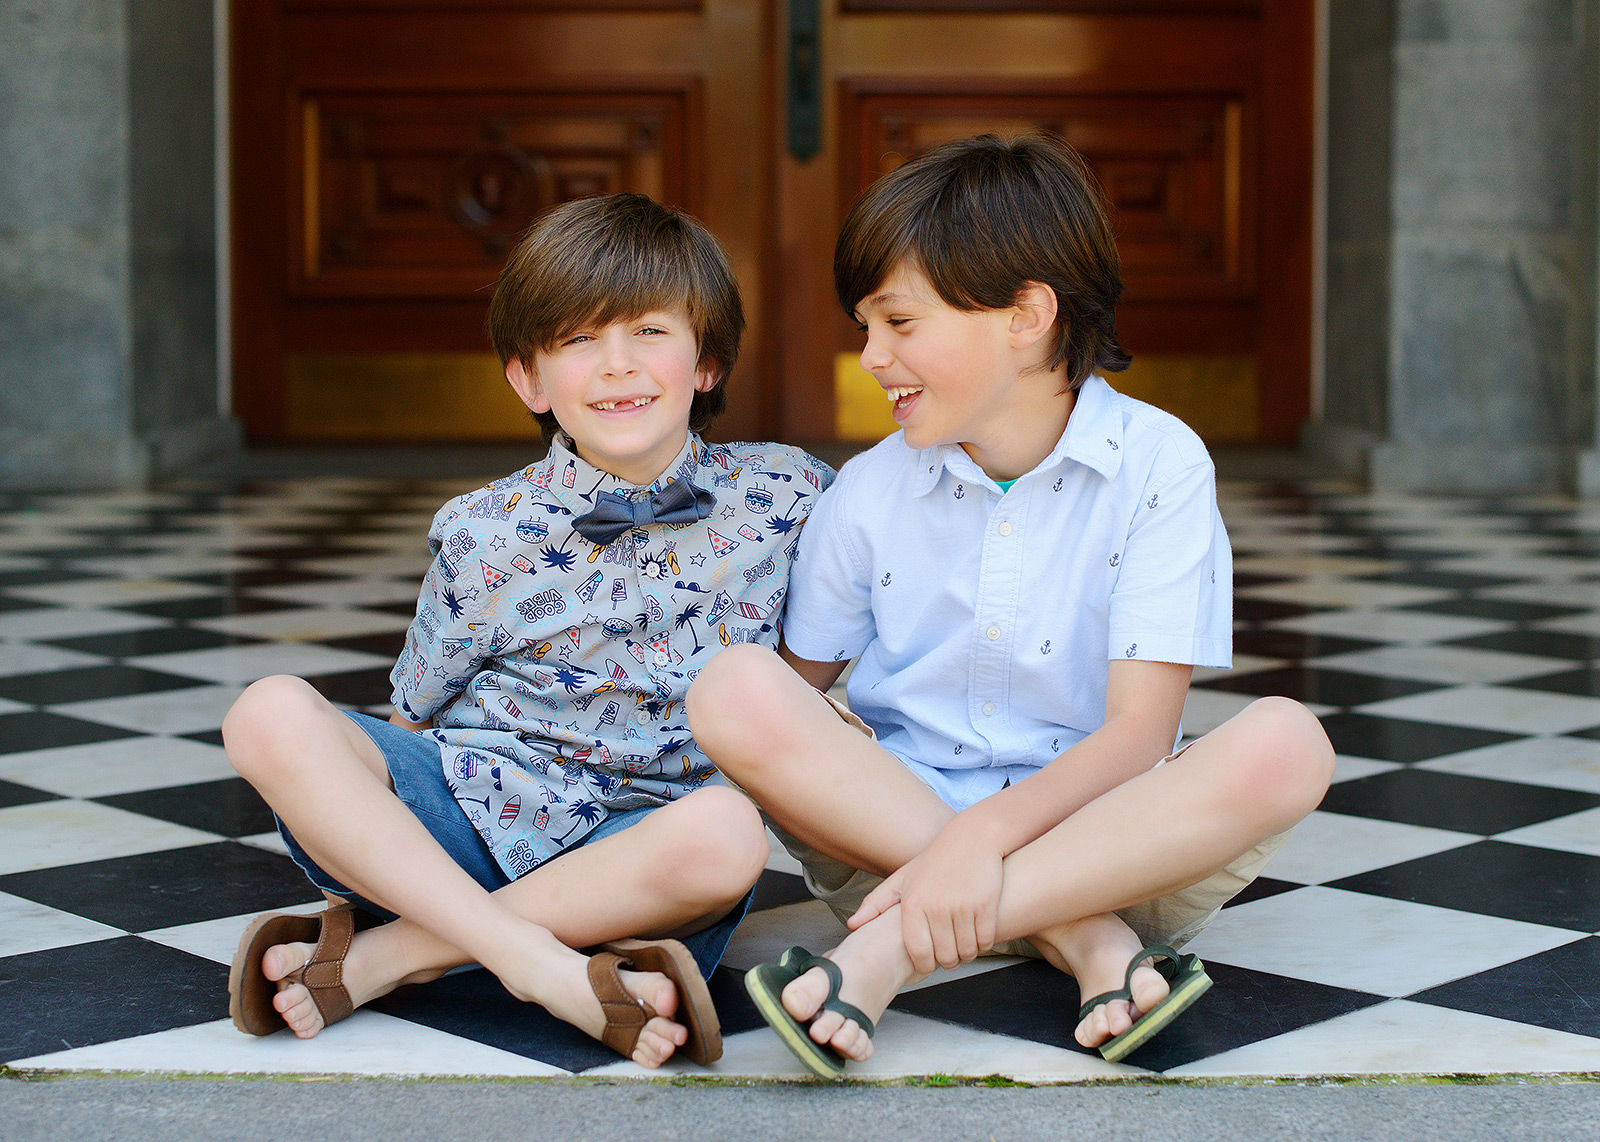 Brothers with bow tie smiling on patterned tile at the sacramento capitol